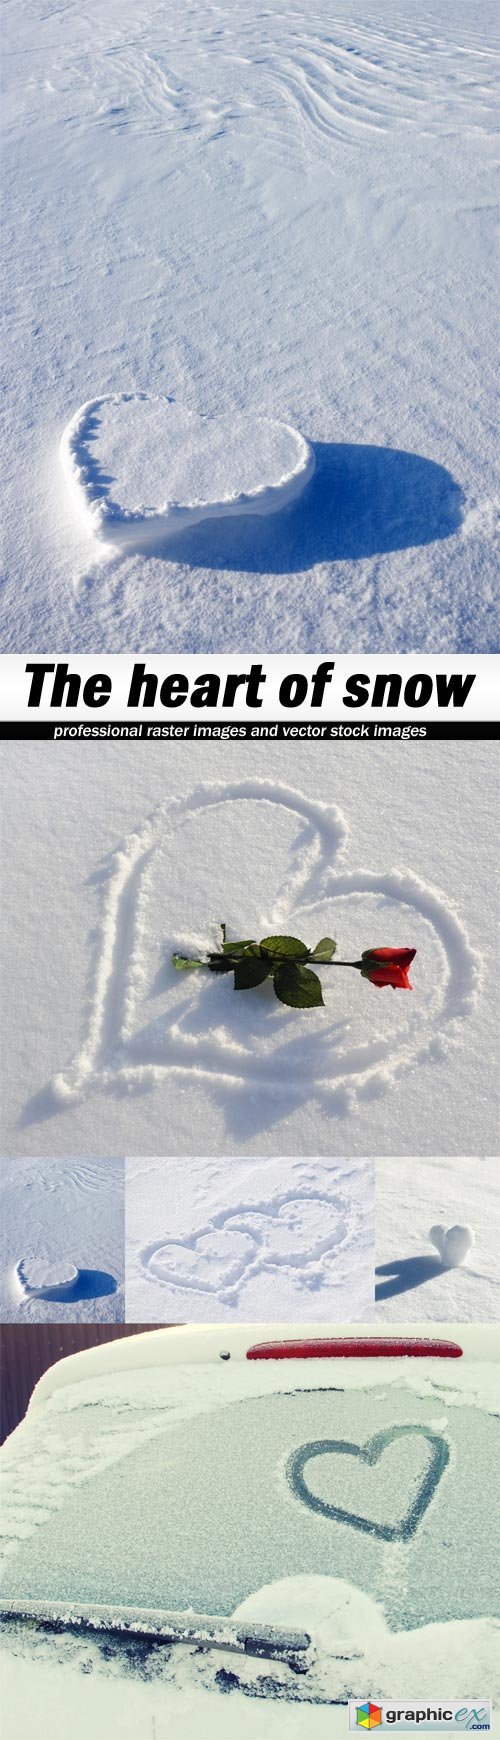 The heart of snow